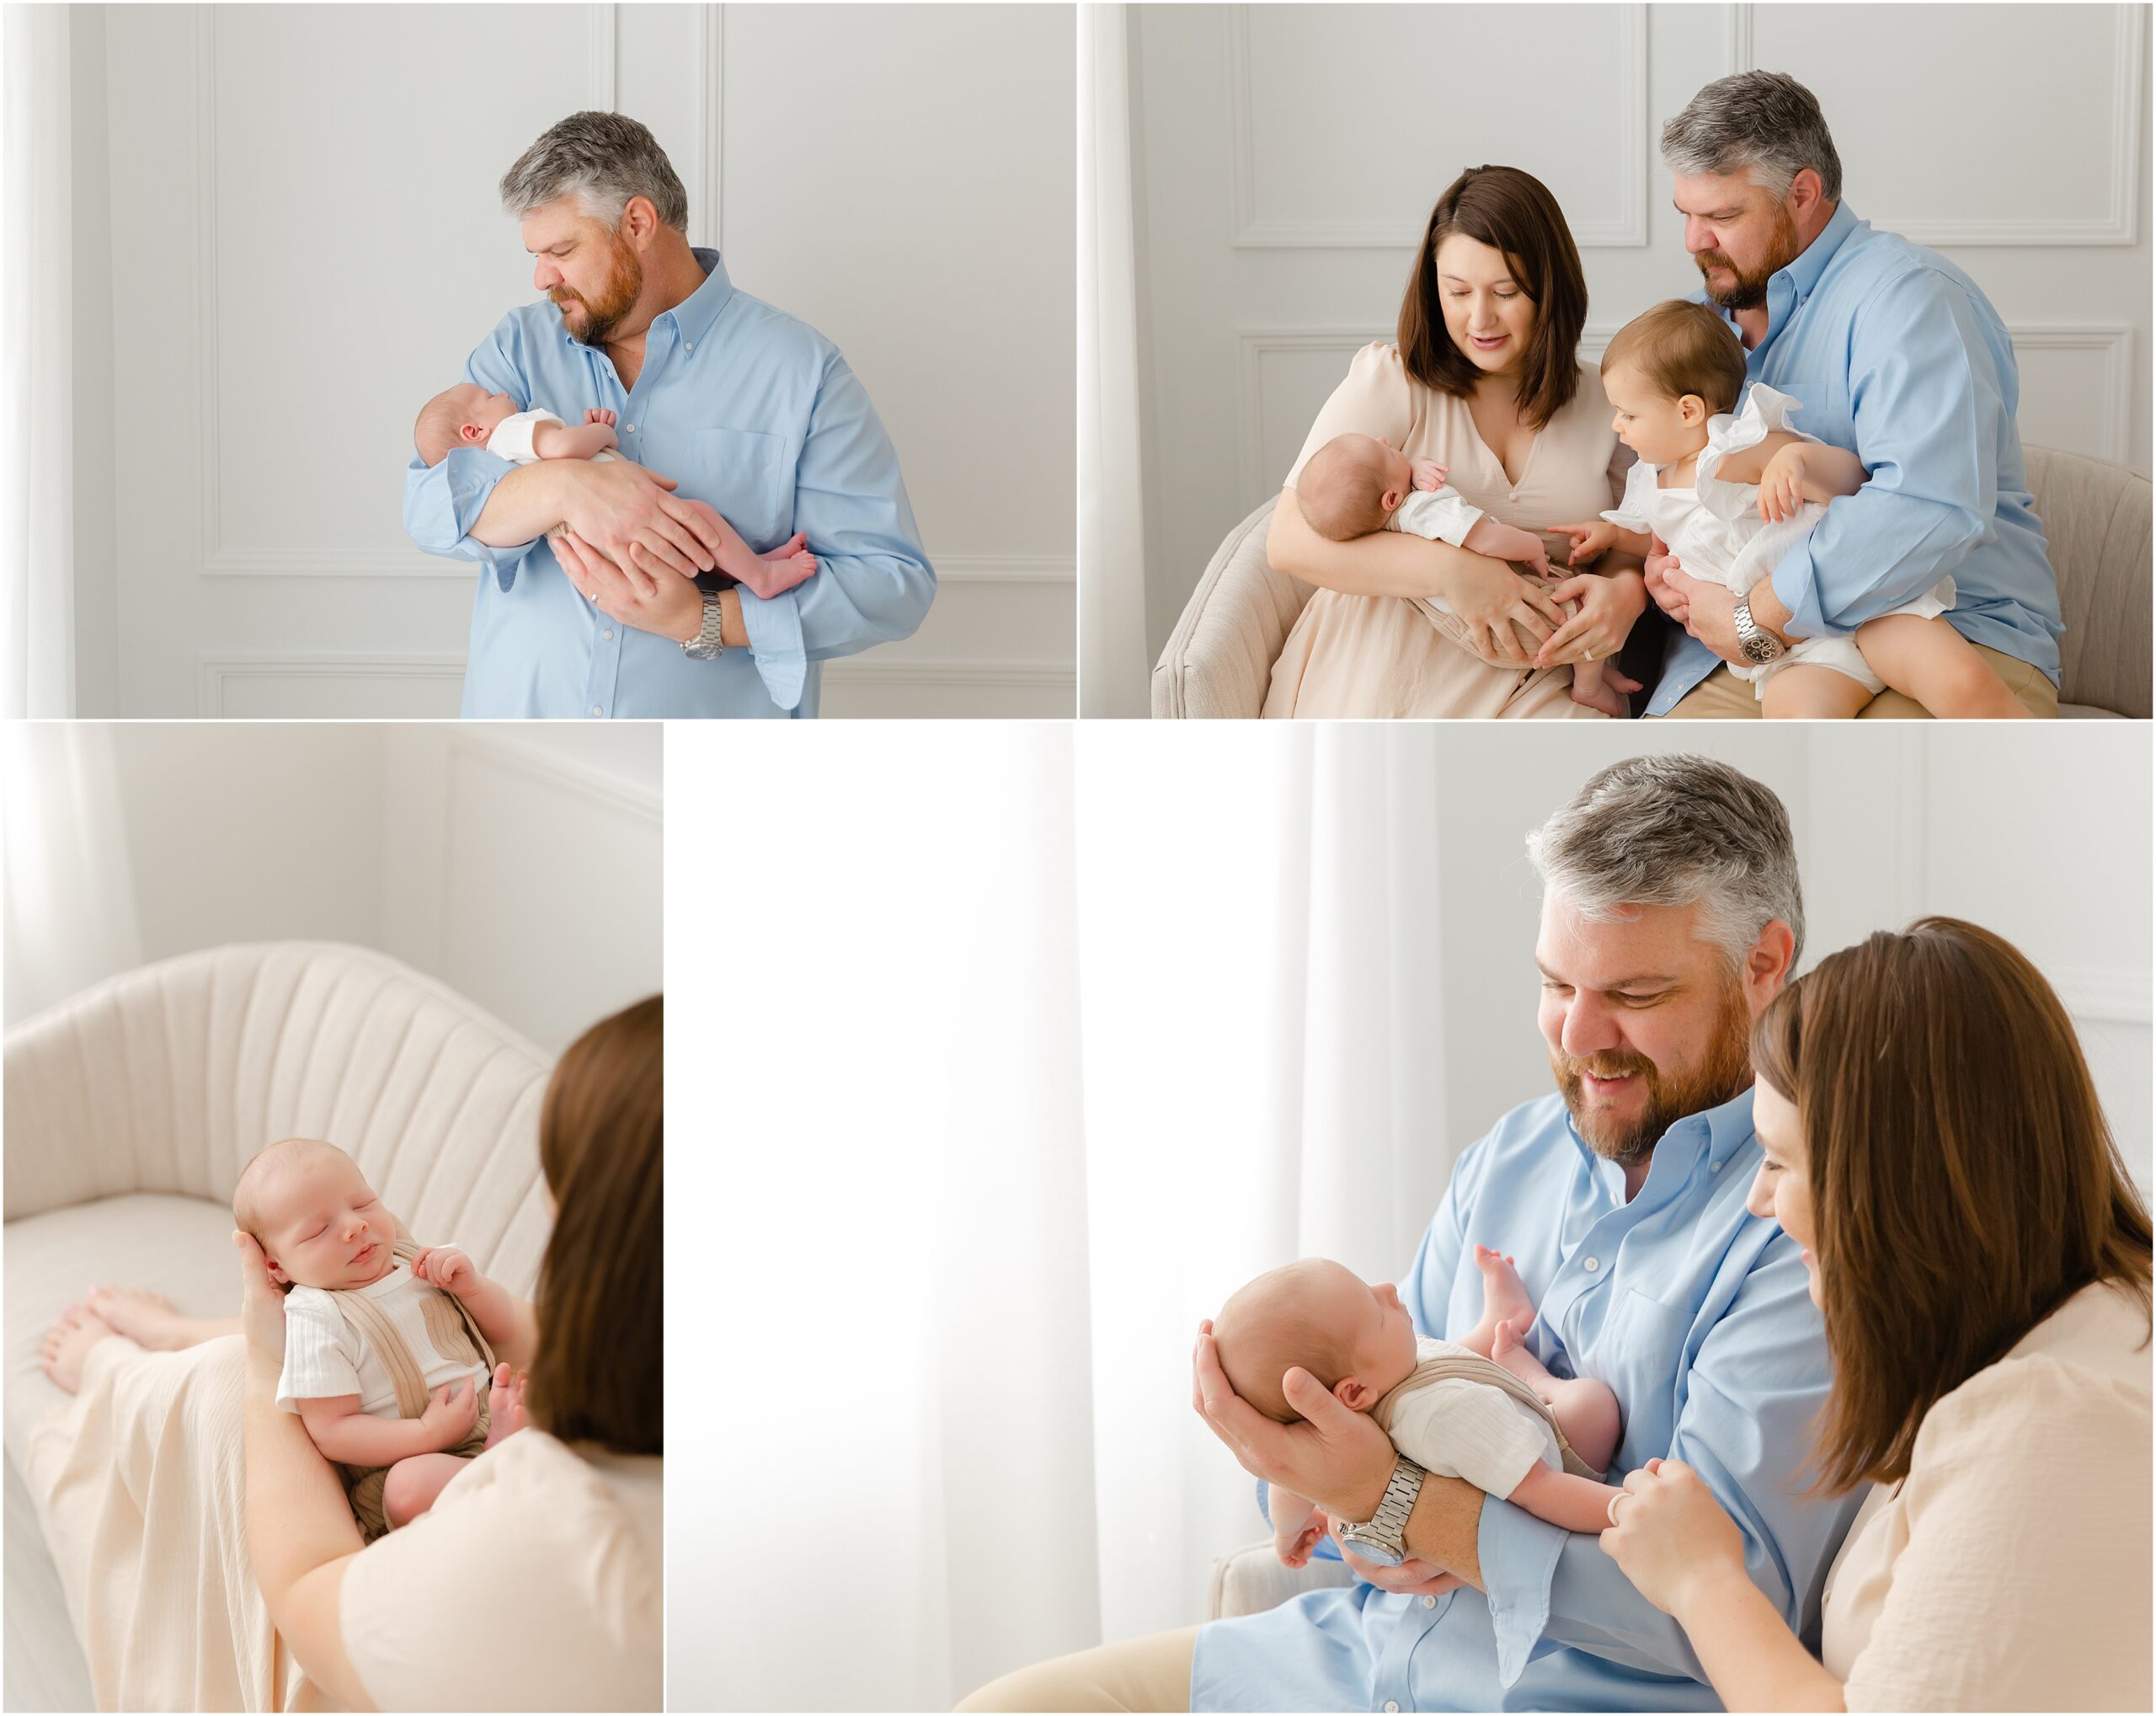 Collage of four photos of a mom, dad, and sister admiring a newborn baby